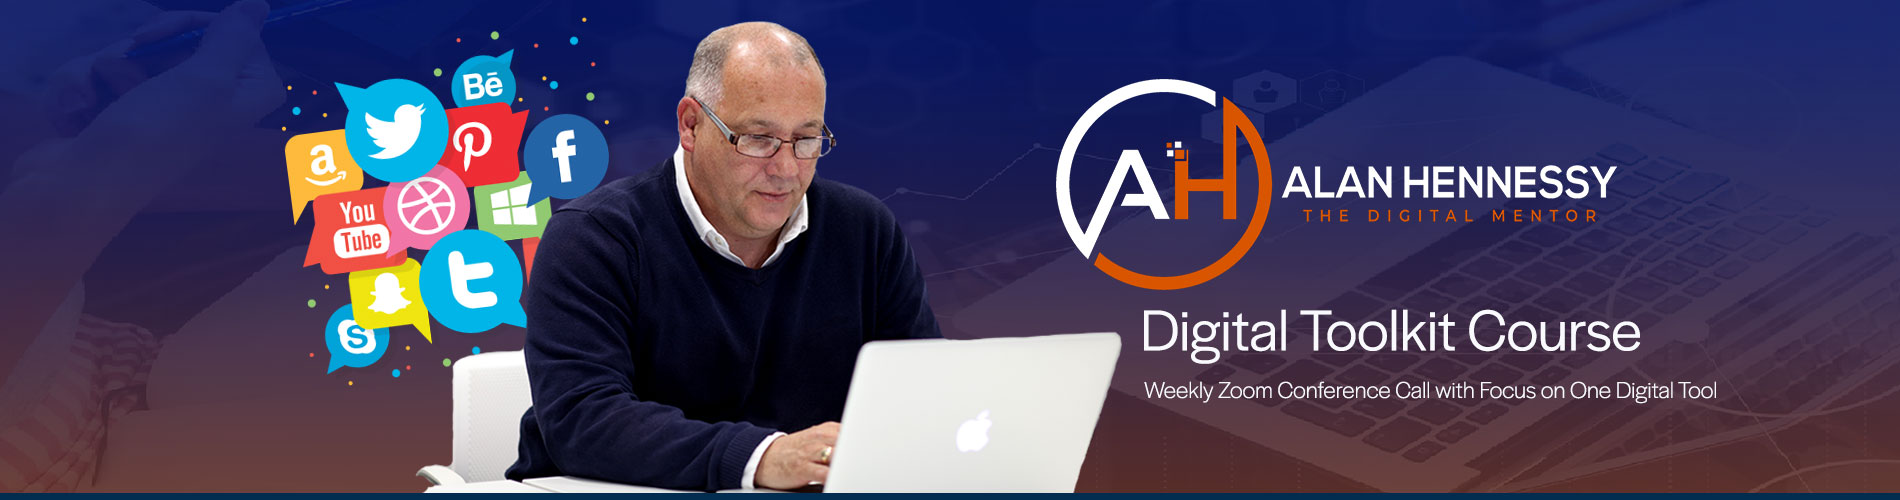 Digital Toolkit Course and Alan Hennessy - Weekly One Hour Group Call focusing on one Digital Tool